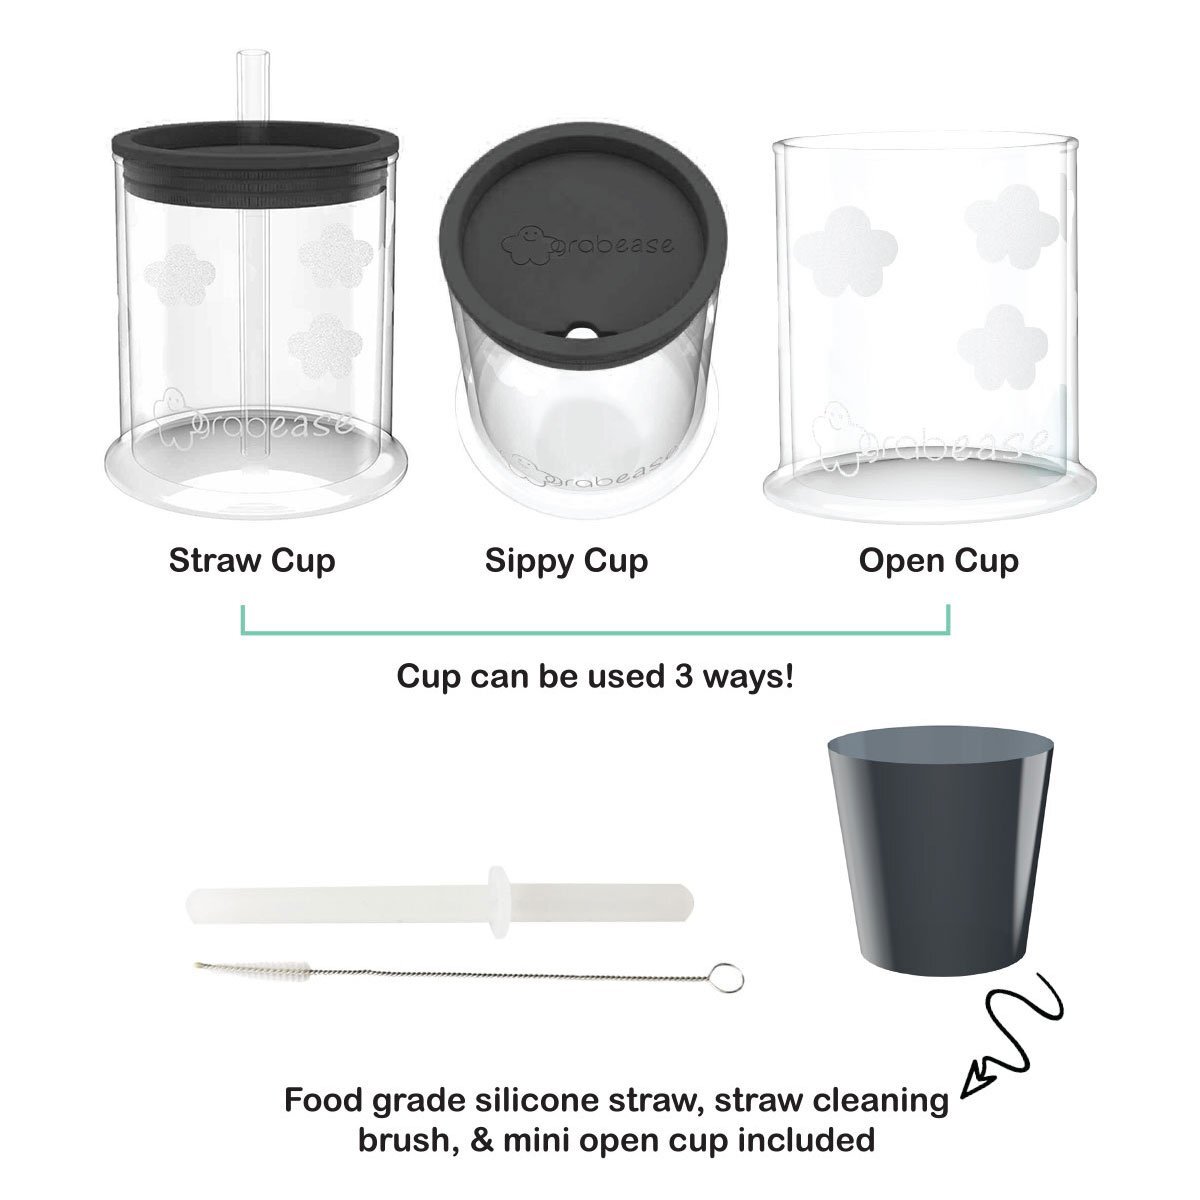 Thinkster Straw Cup of Steel, Stainless Steel Cup